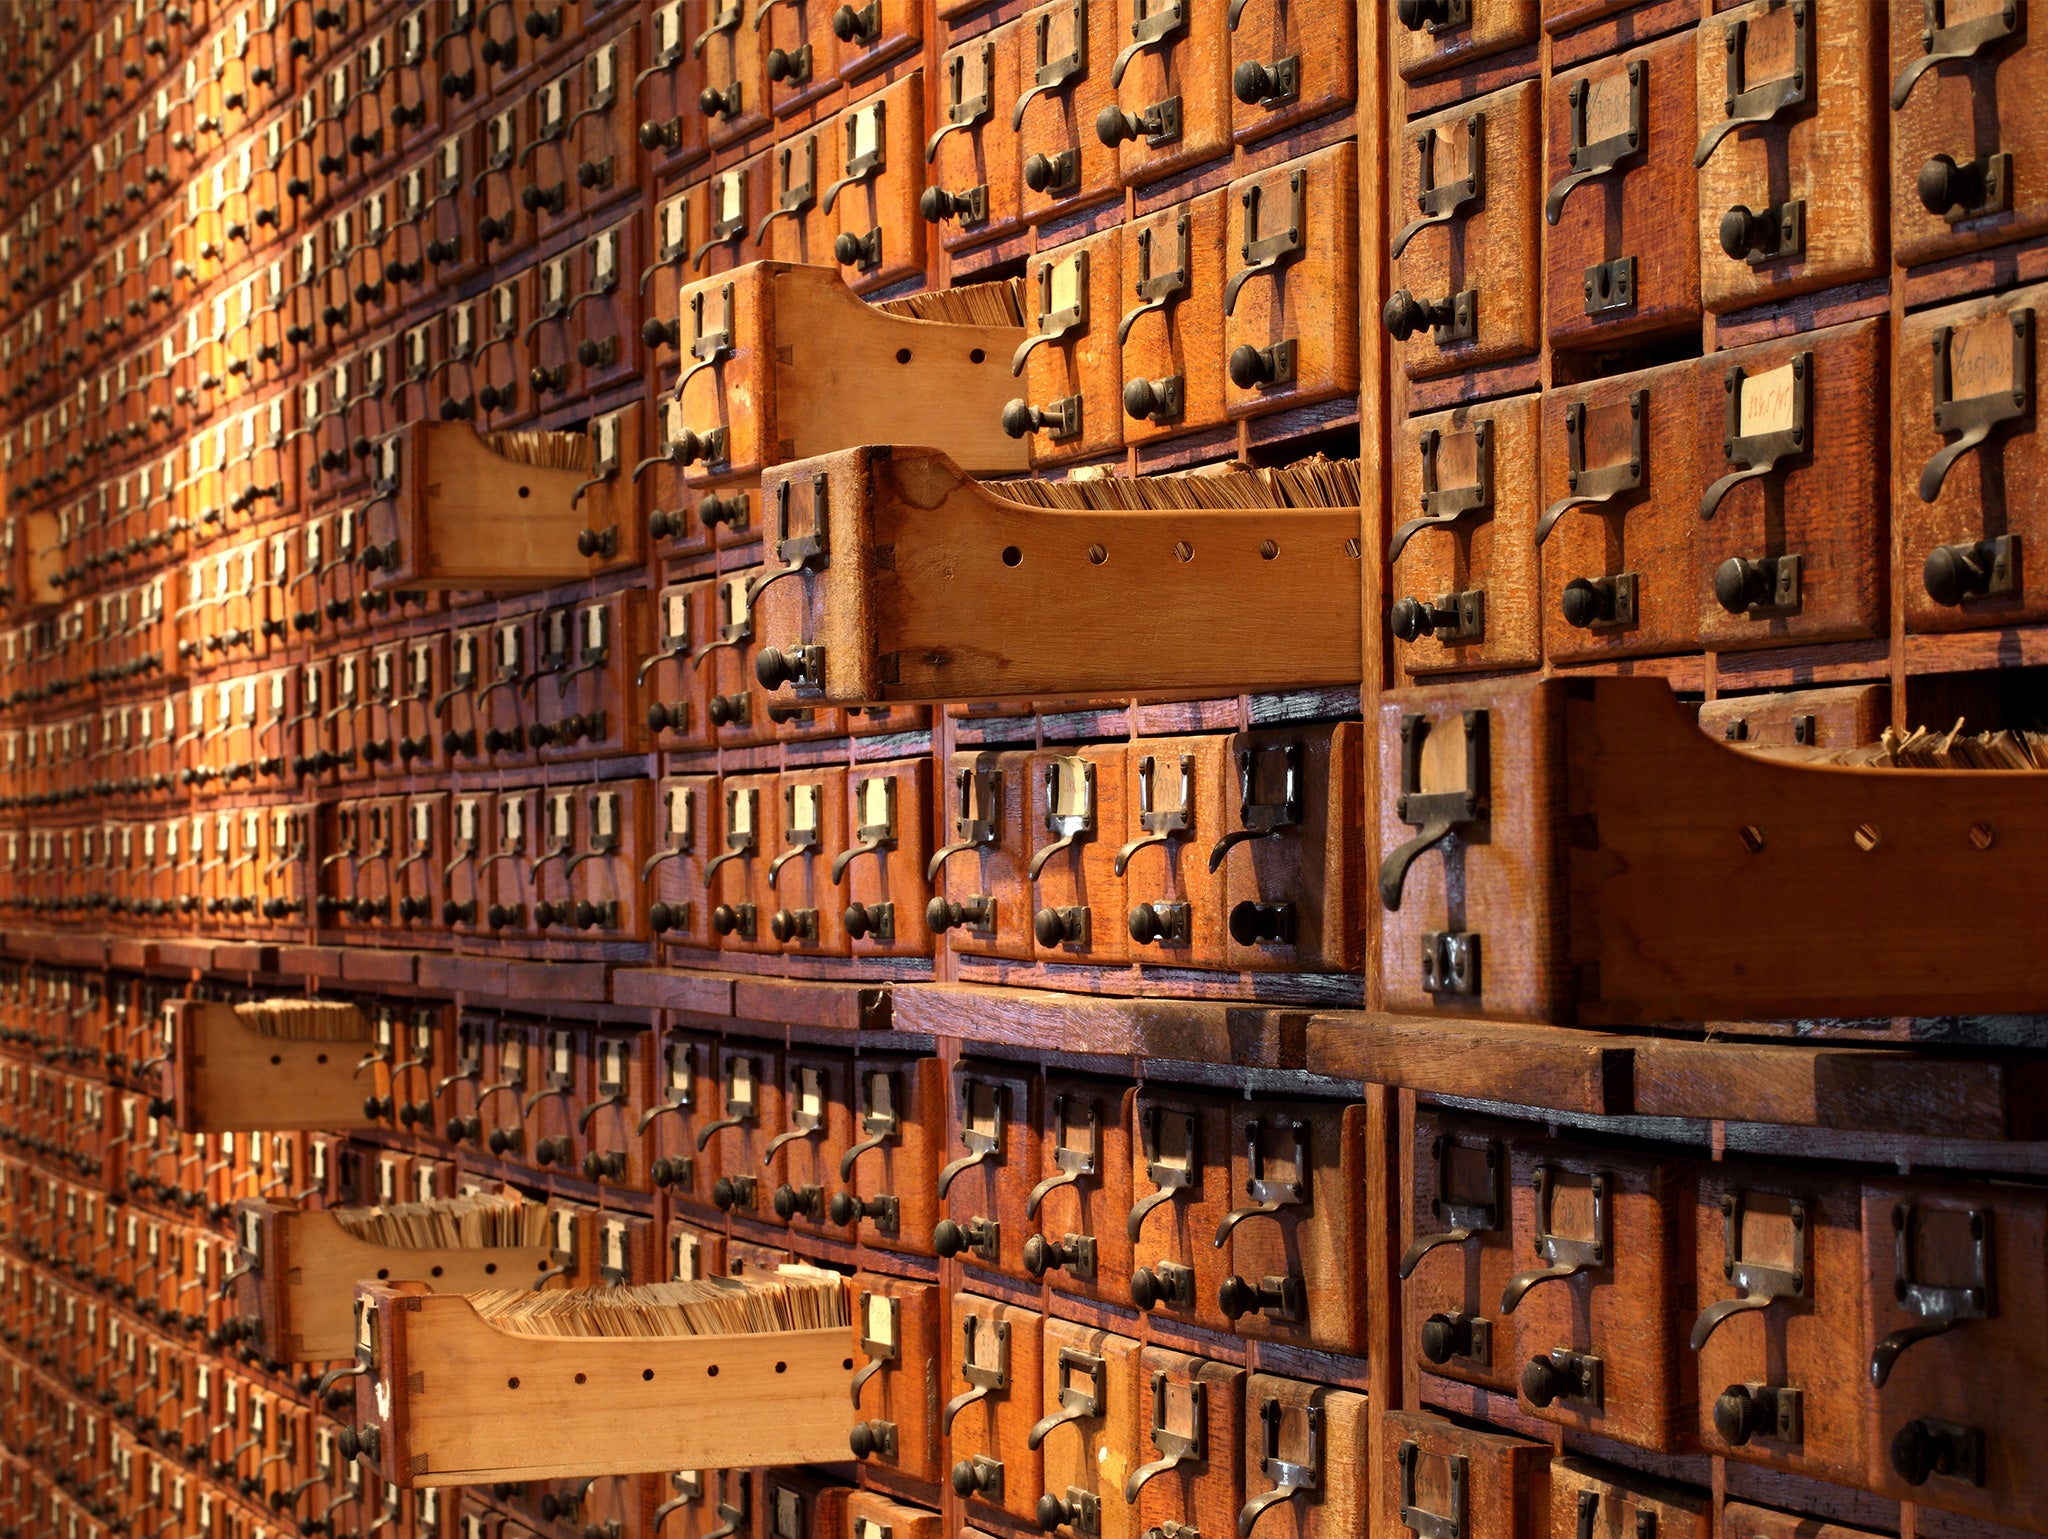 The museum holds more than 12 million index cards and documents